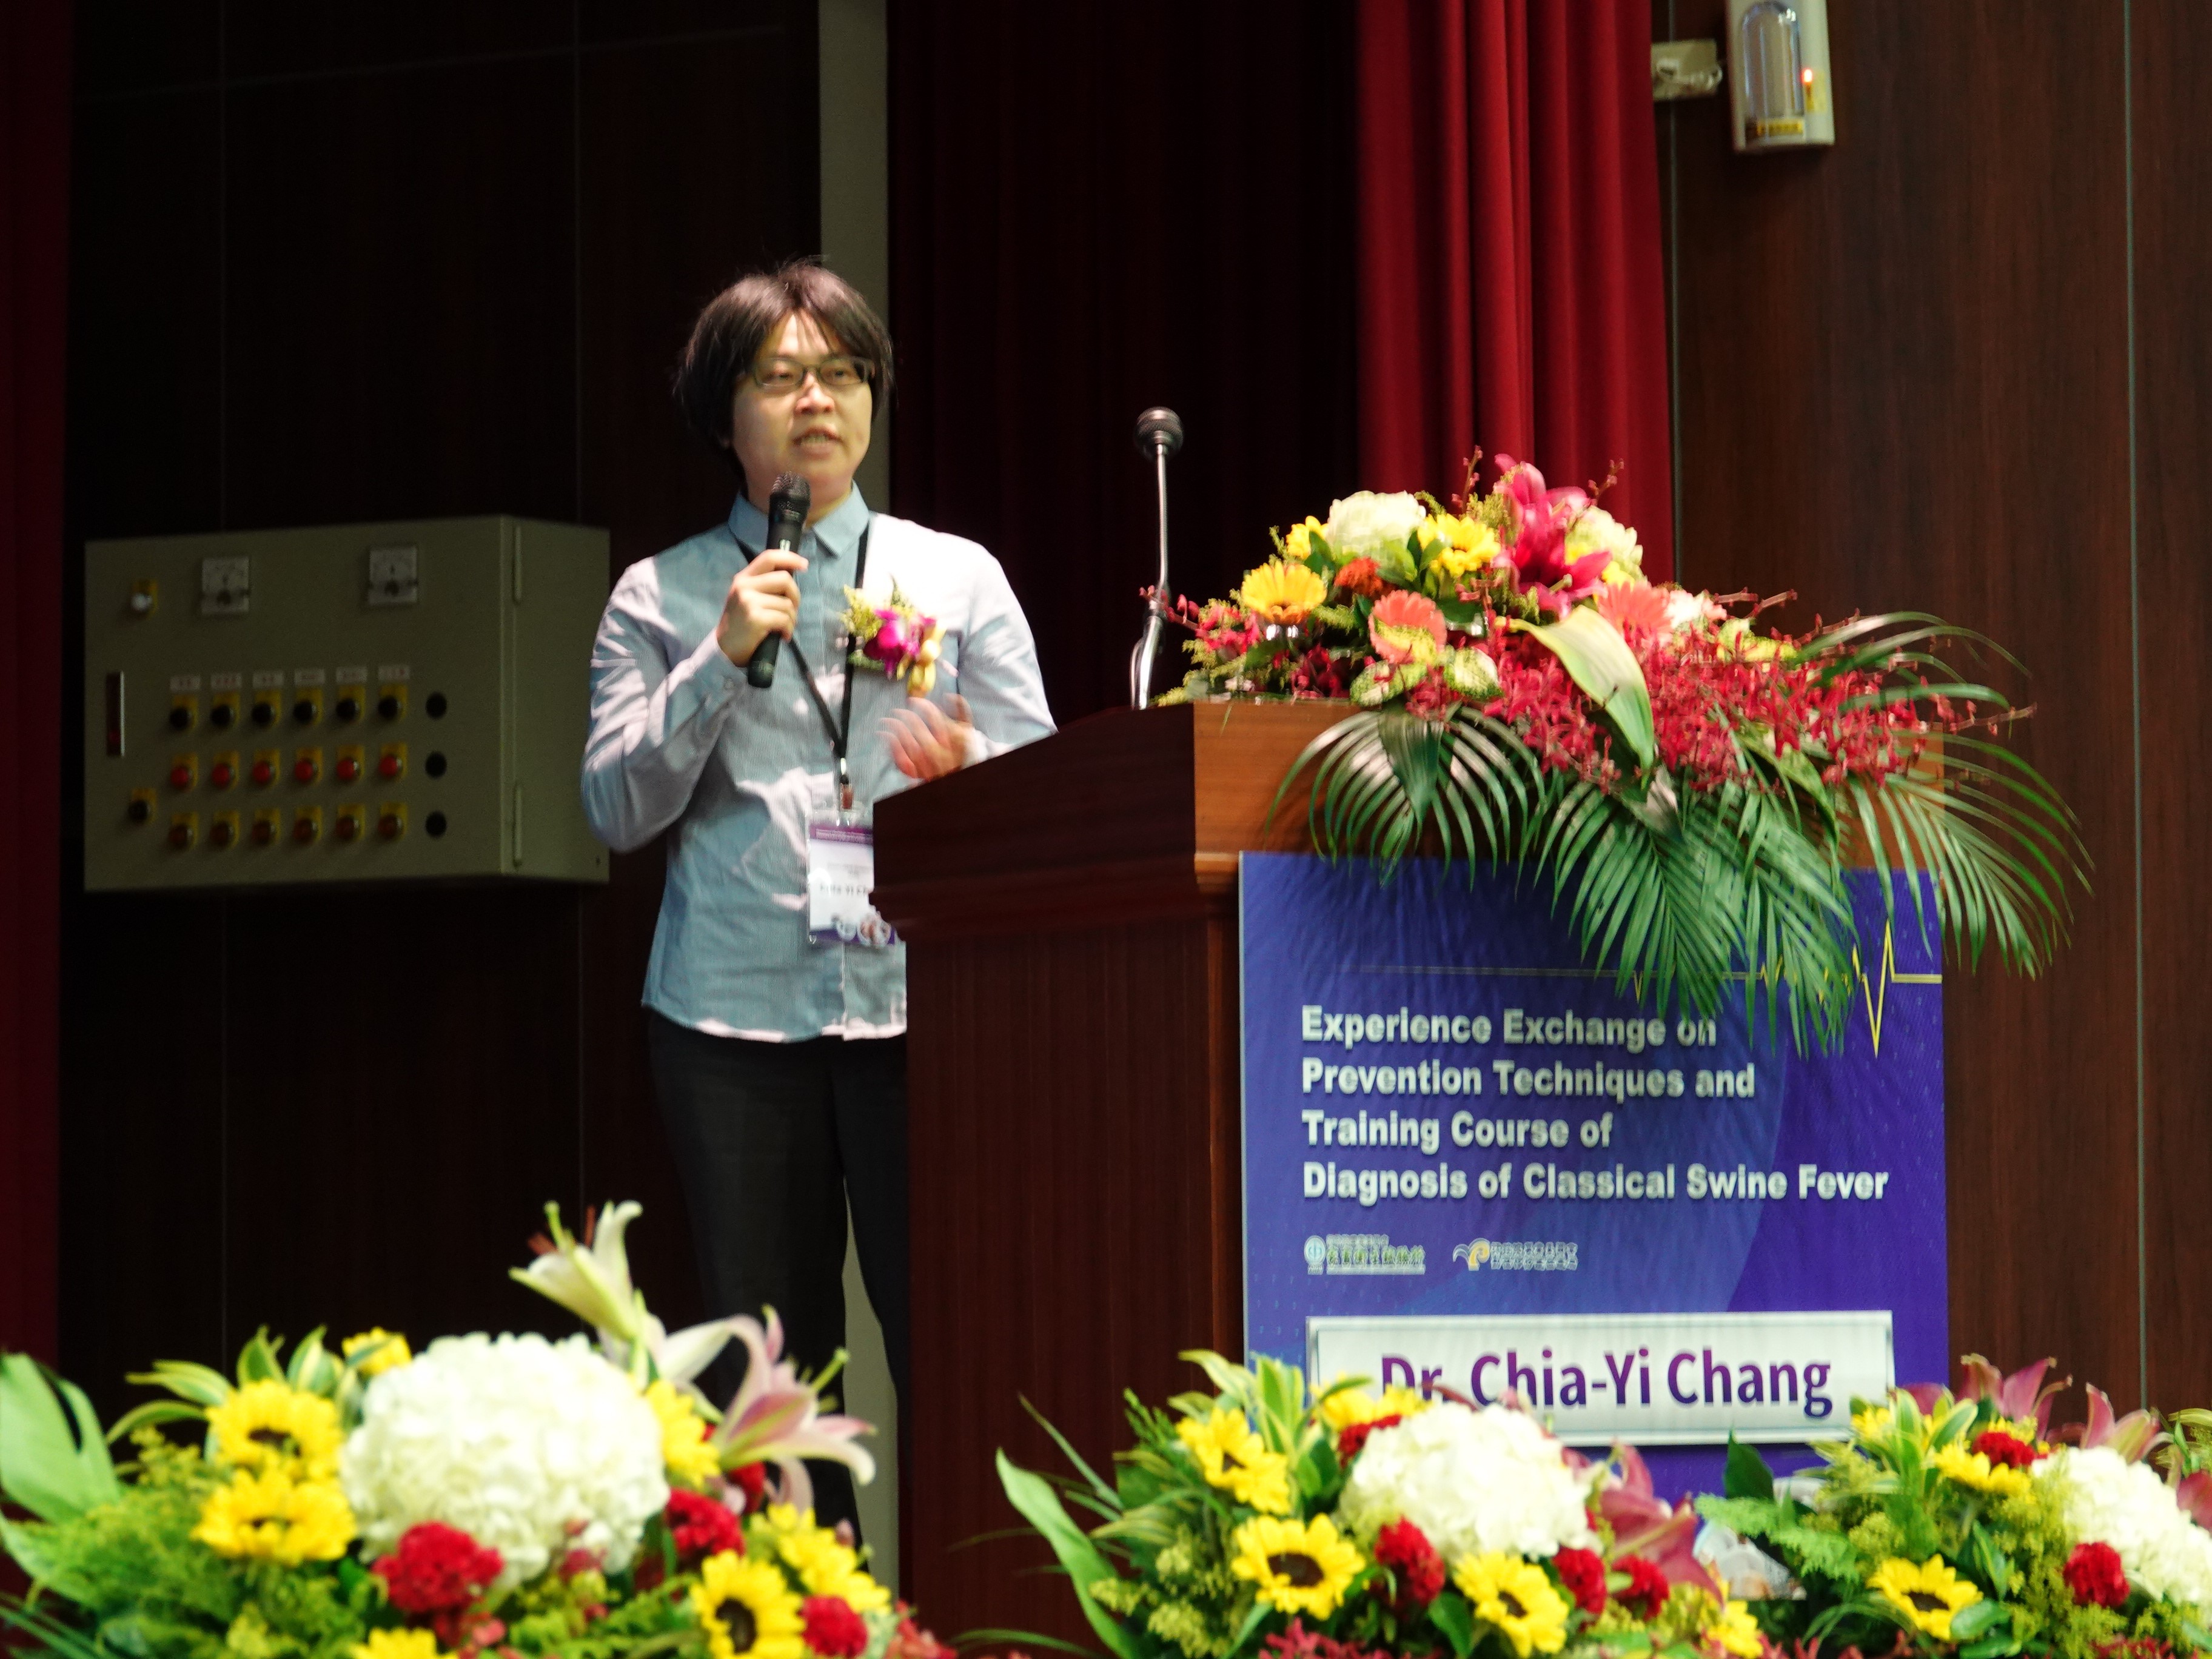 Surveillance, control and research of classical swine fever in Taiwan, by Dr. Chia-Yi Chang, Animal Health Research Institute, Taiwan